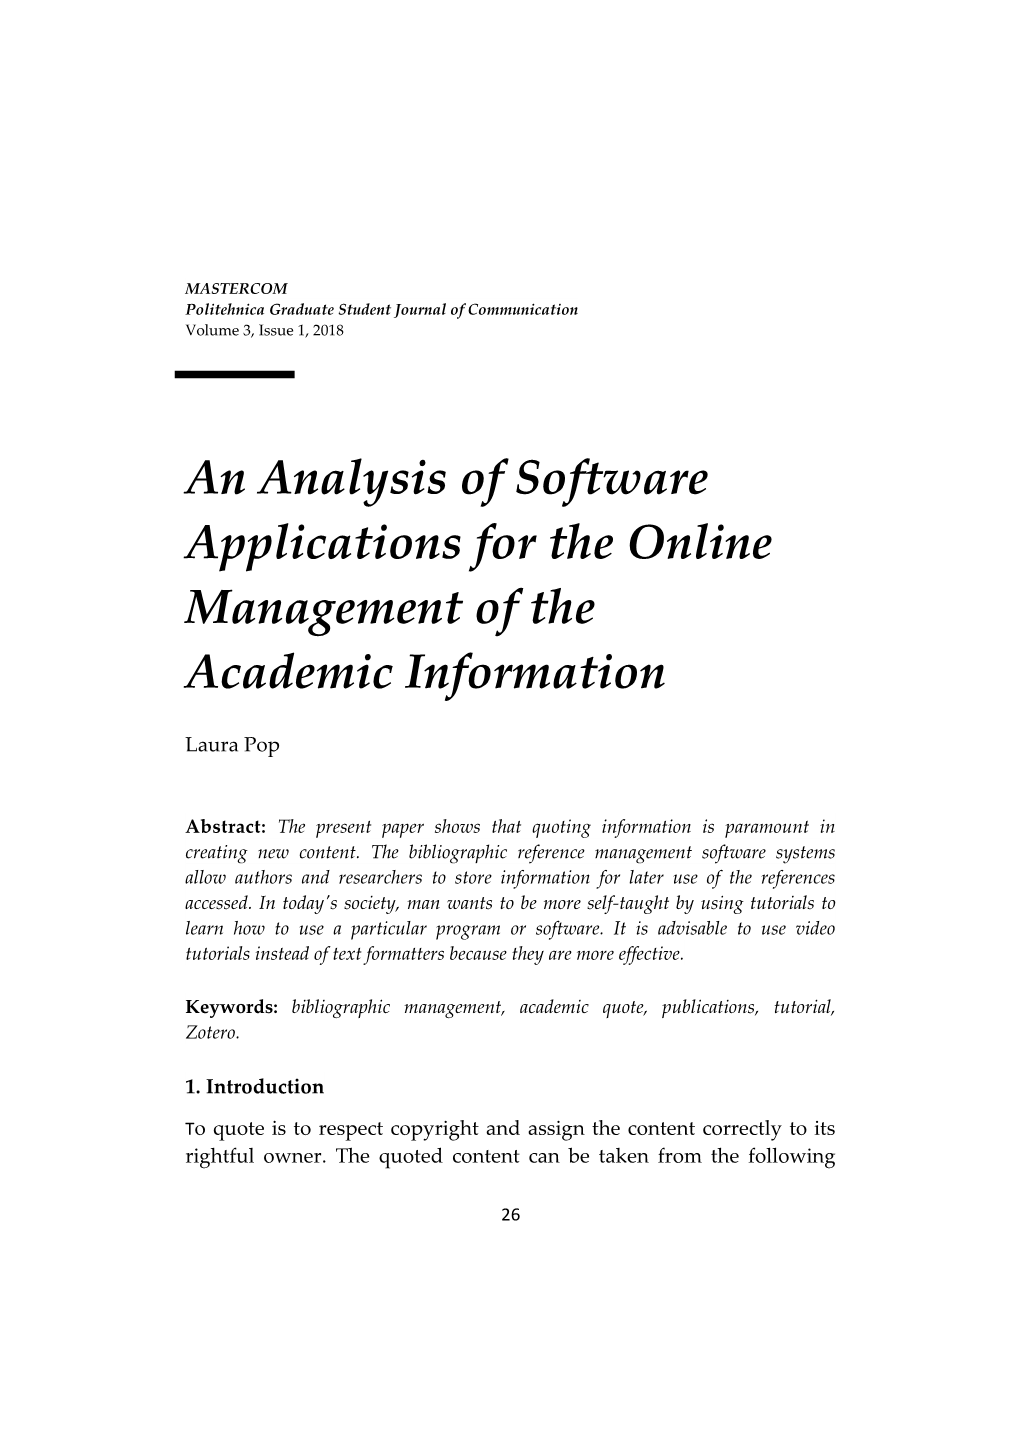 An Analysis of Software Applications for the Online Management of the Academic Information